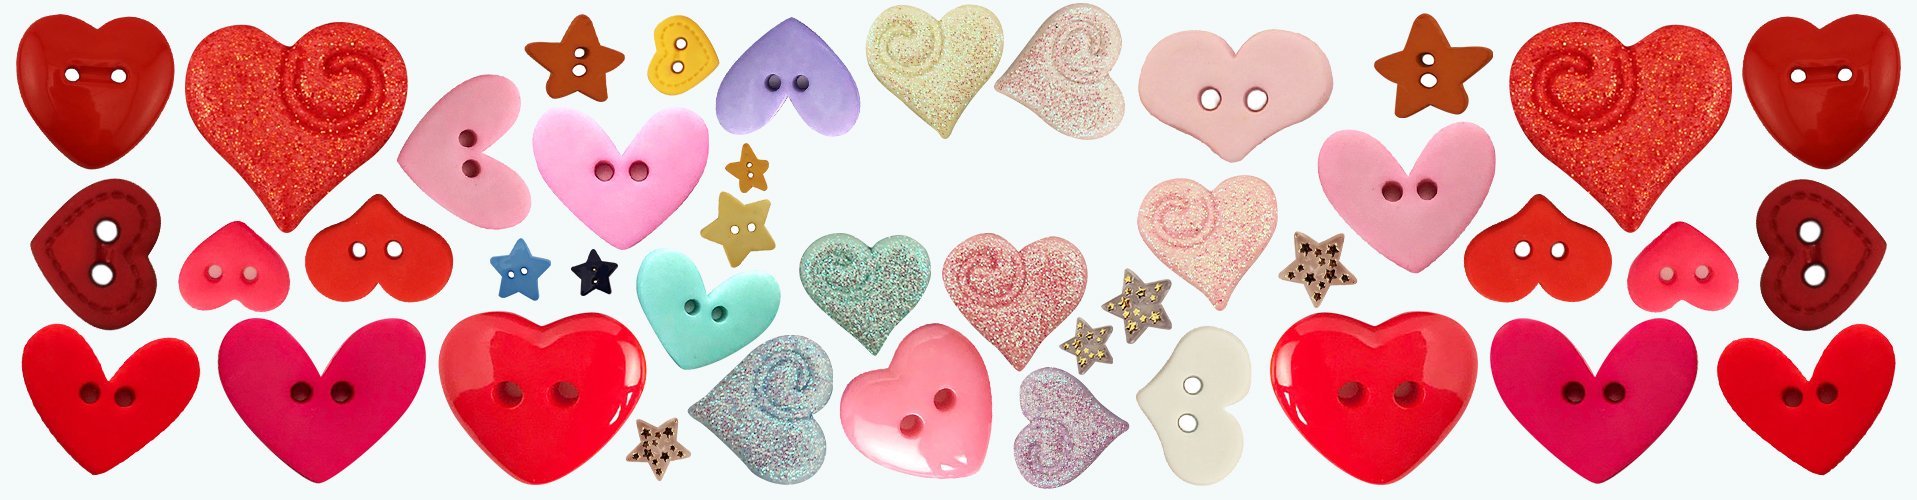 Hearts & Stars themed buttons for scrapbooks, card making and crafts